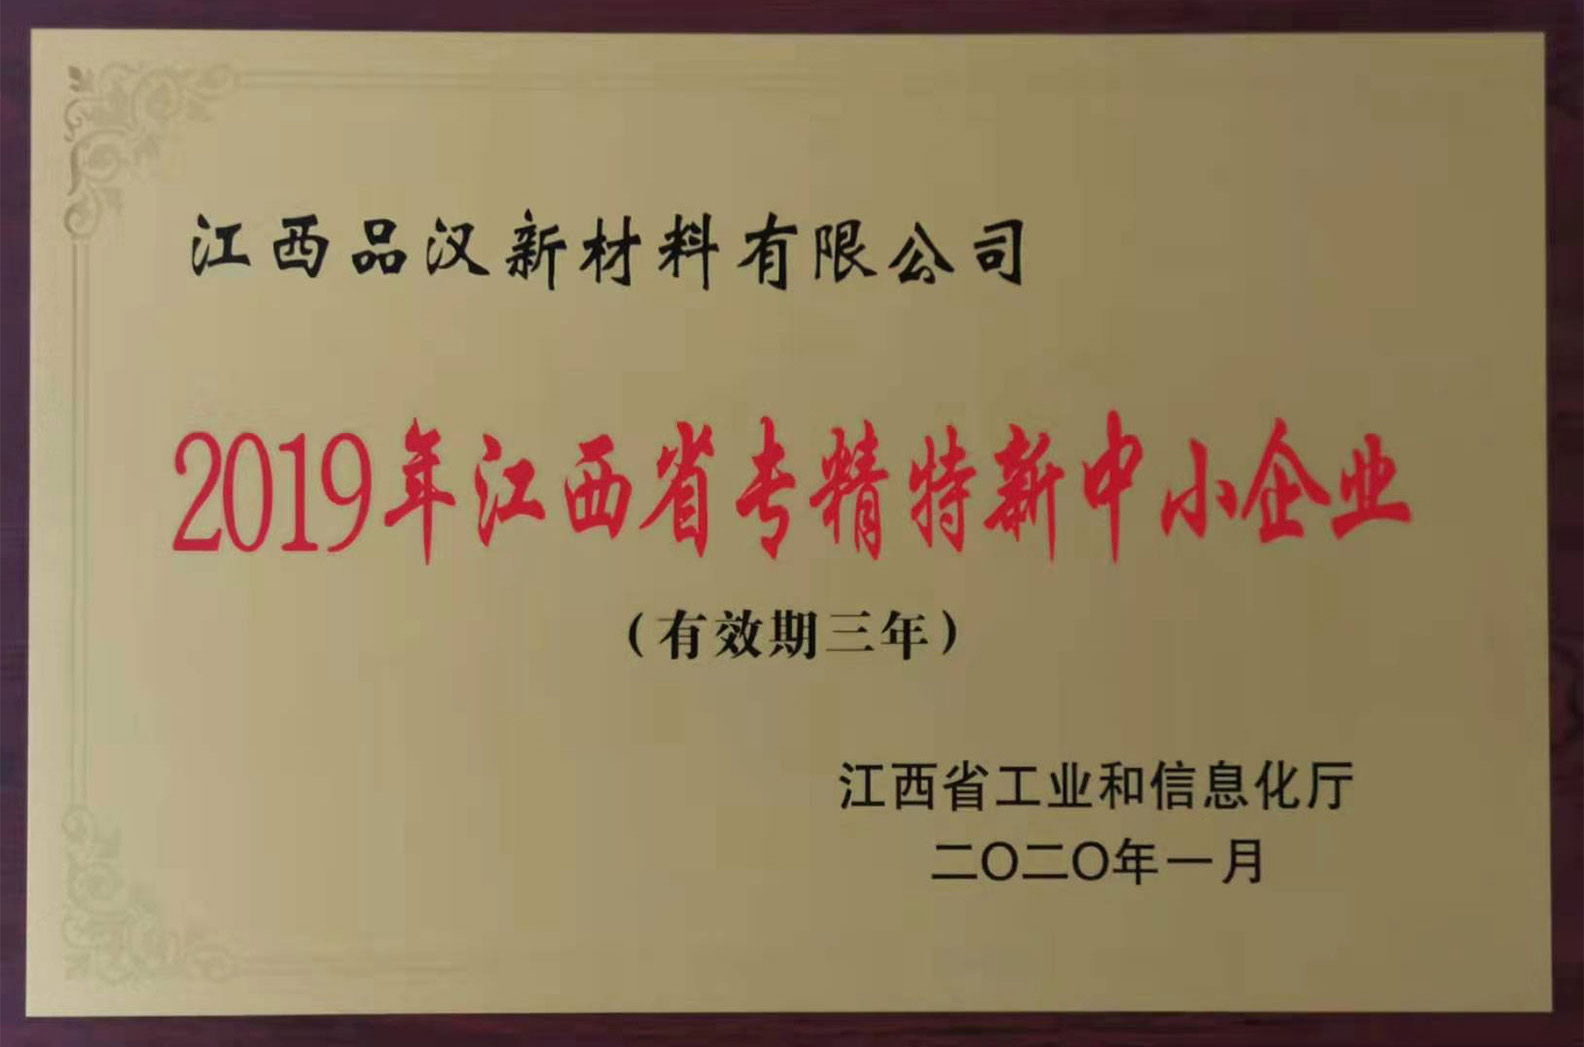 In 2019, Jiangxi Province specialized and special new small and medium-sized enterprises